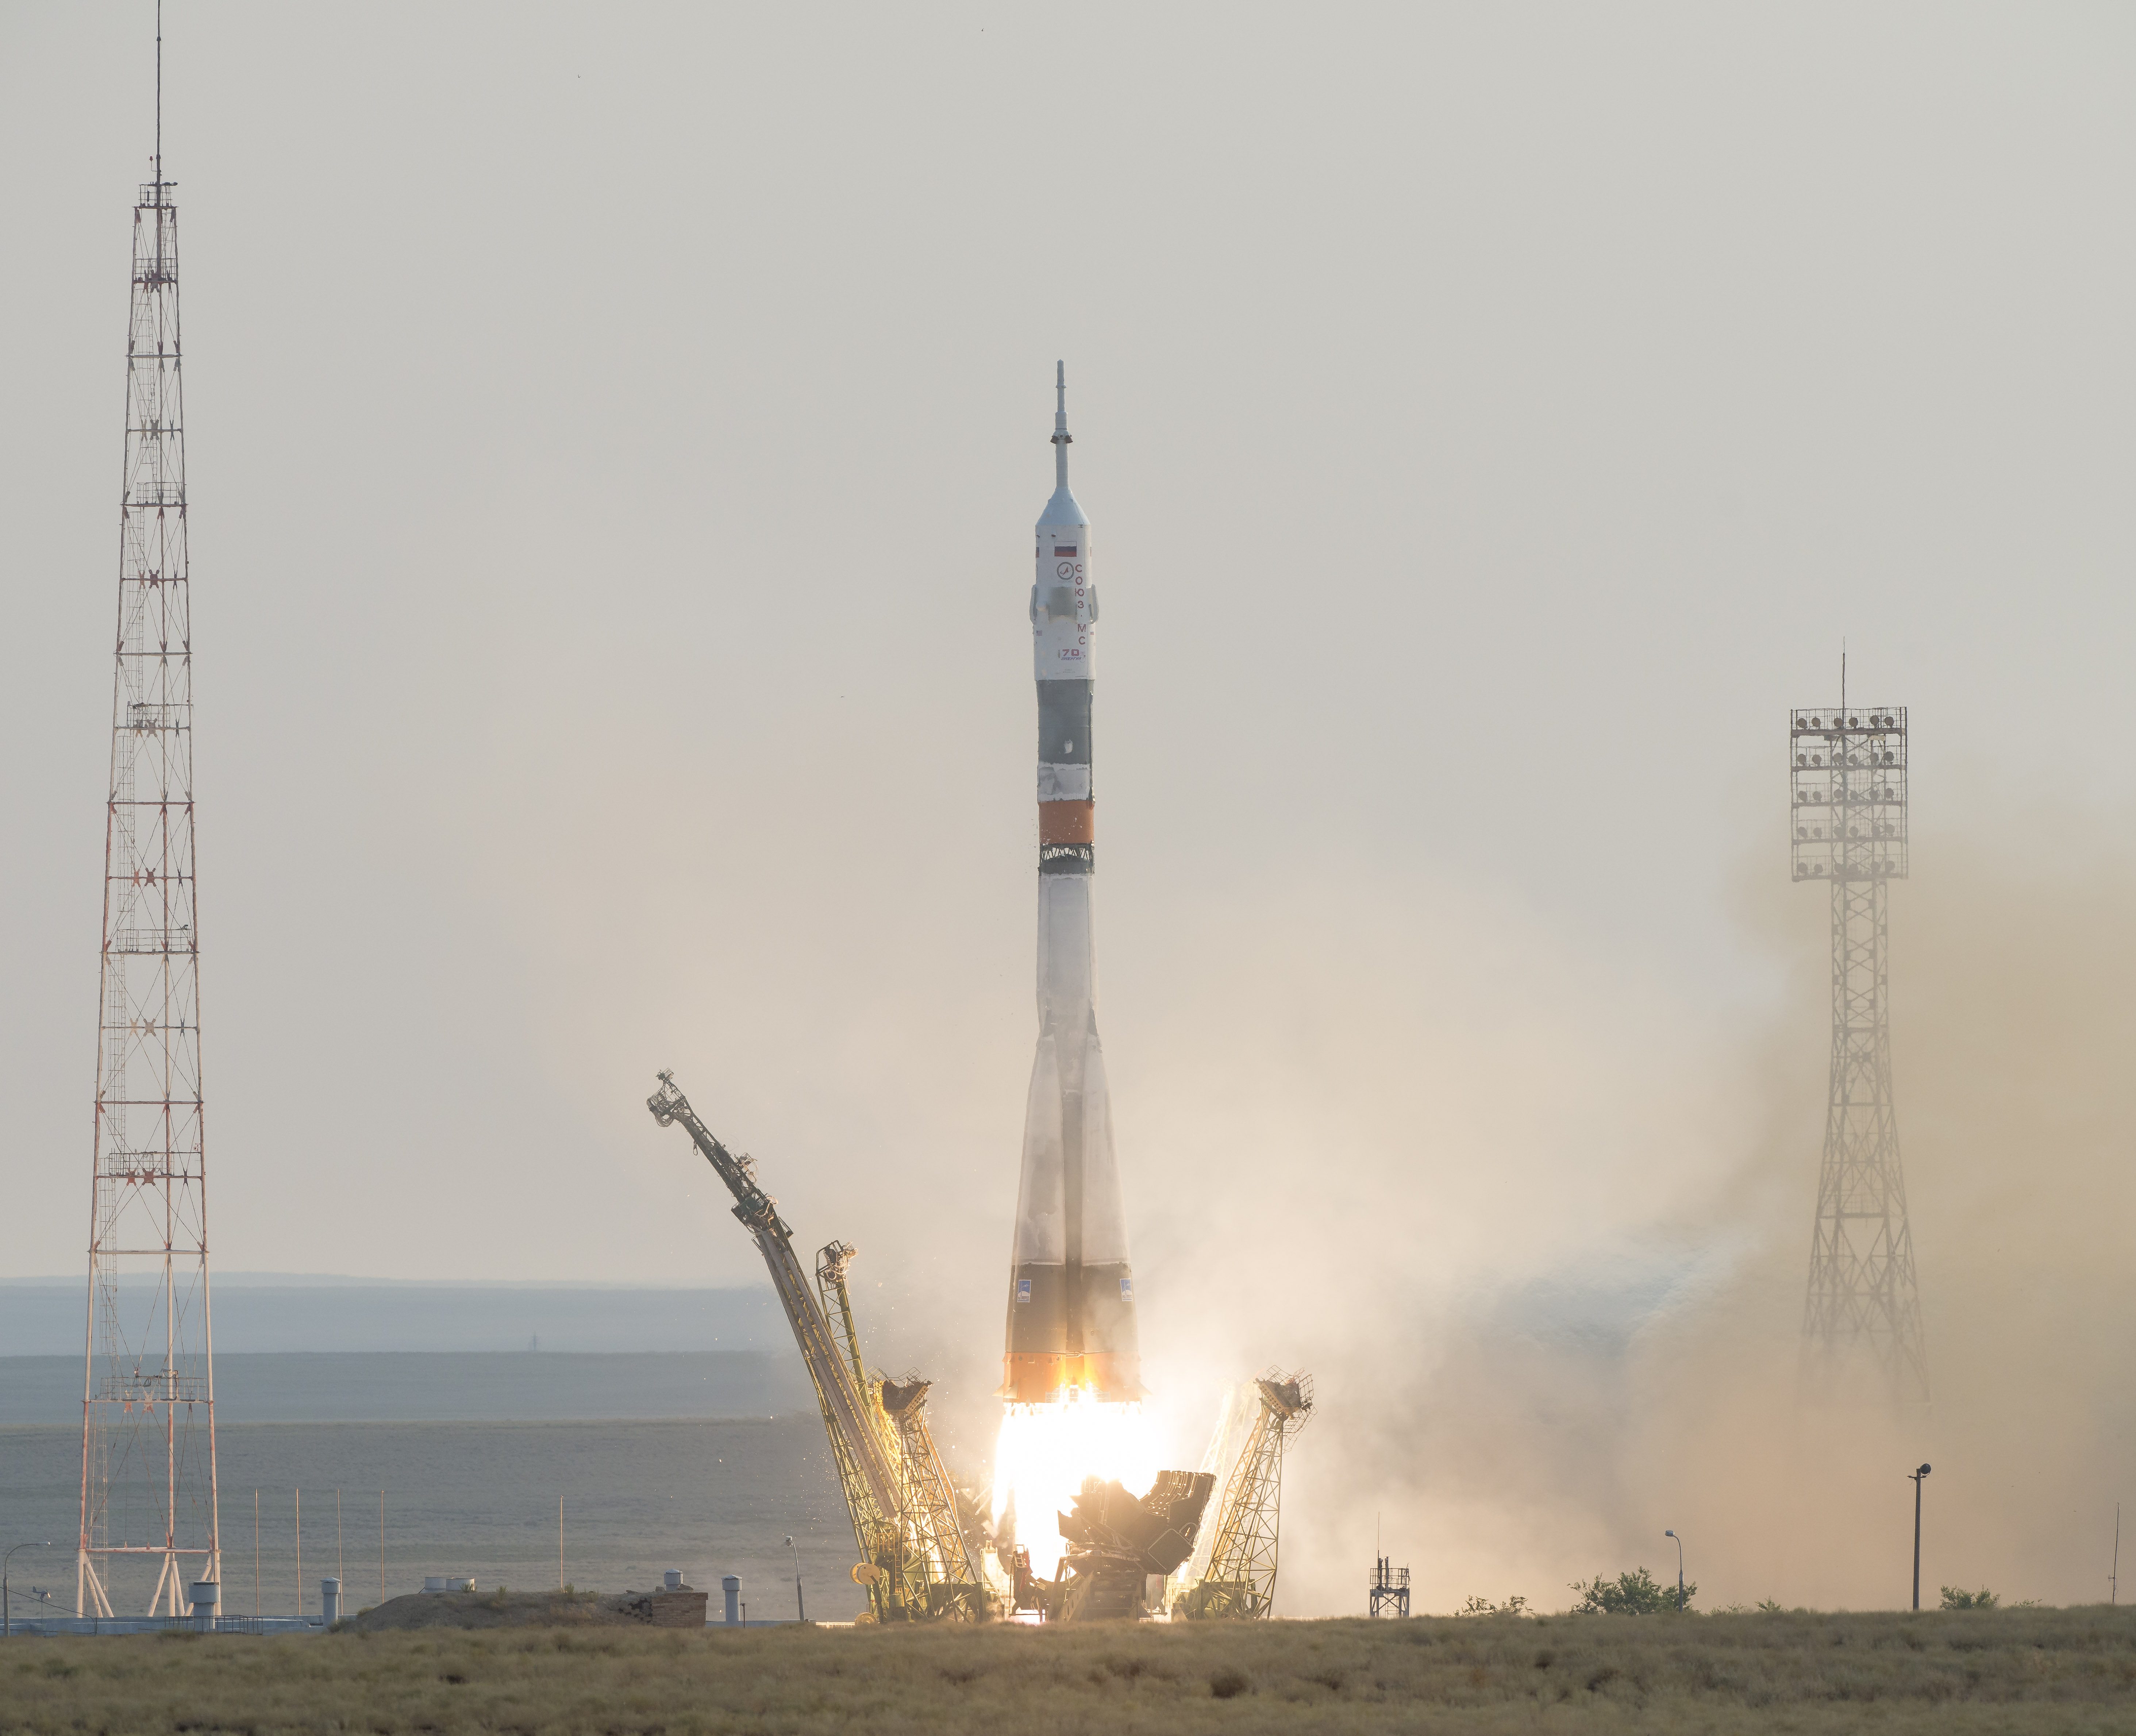 Expedition 48 Launch